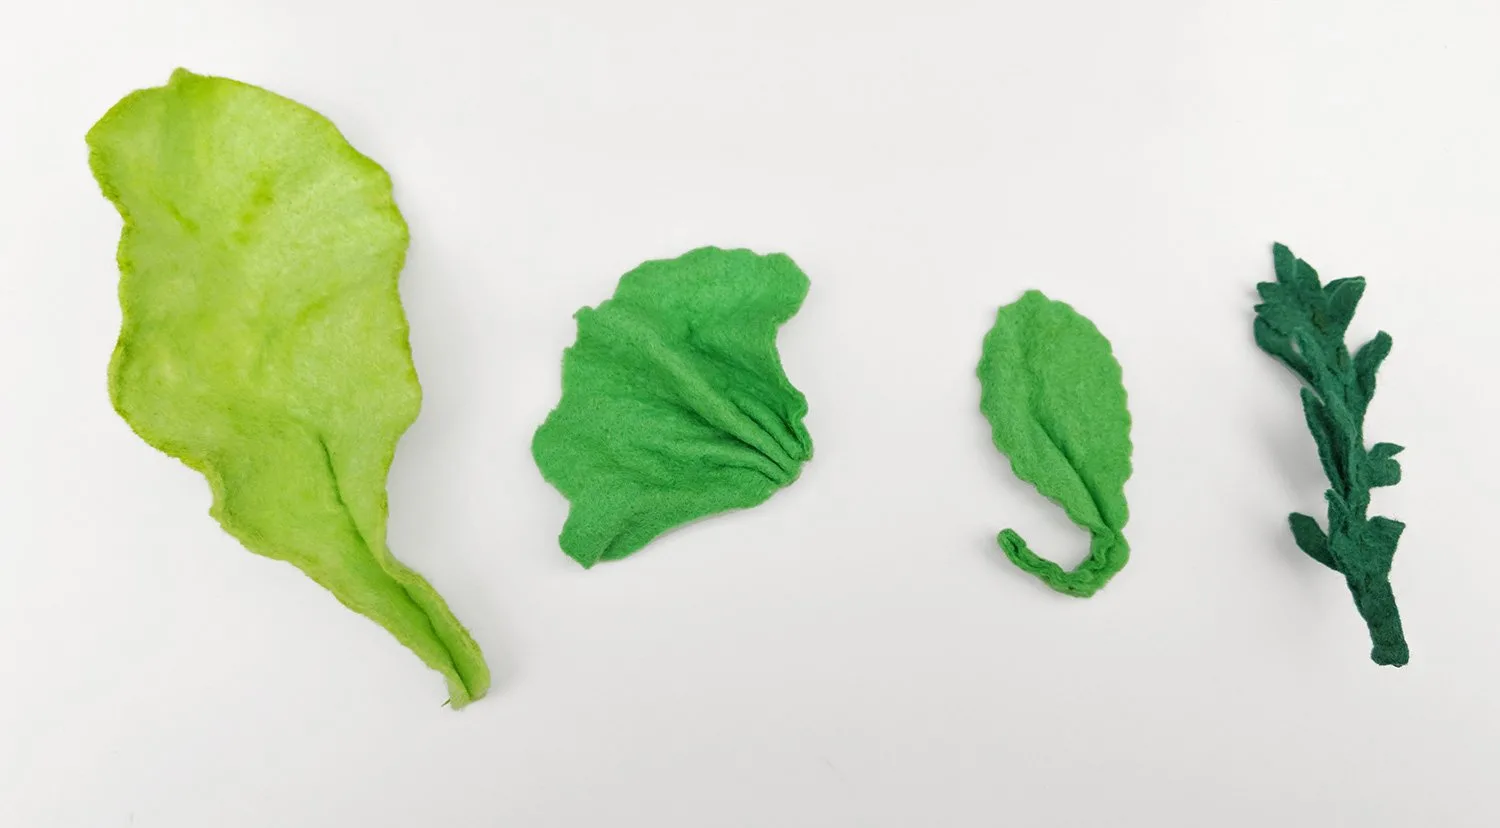 Shape leaves as appropriate to their leaf type – use Google to look at the real thing